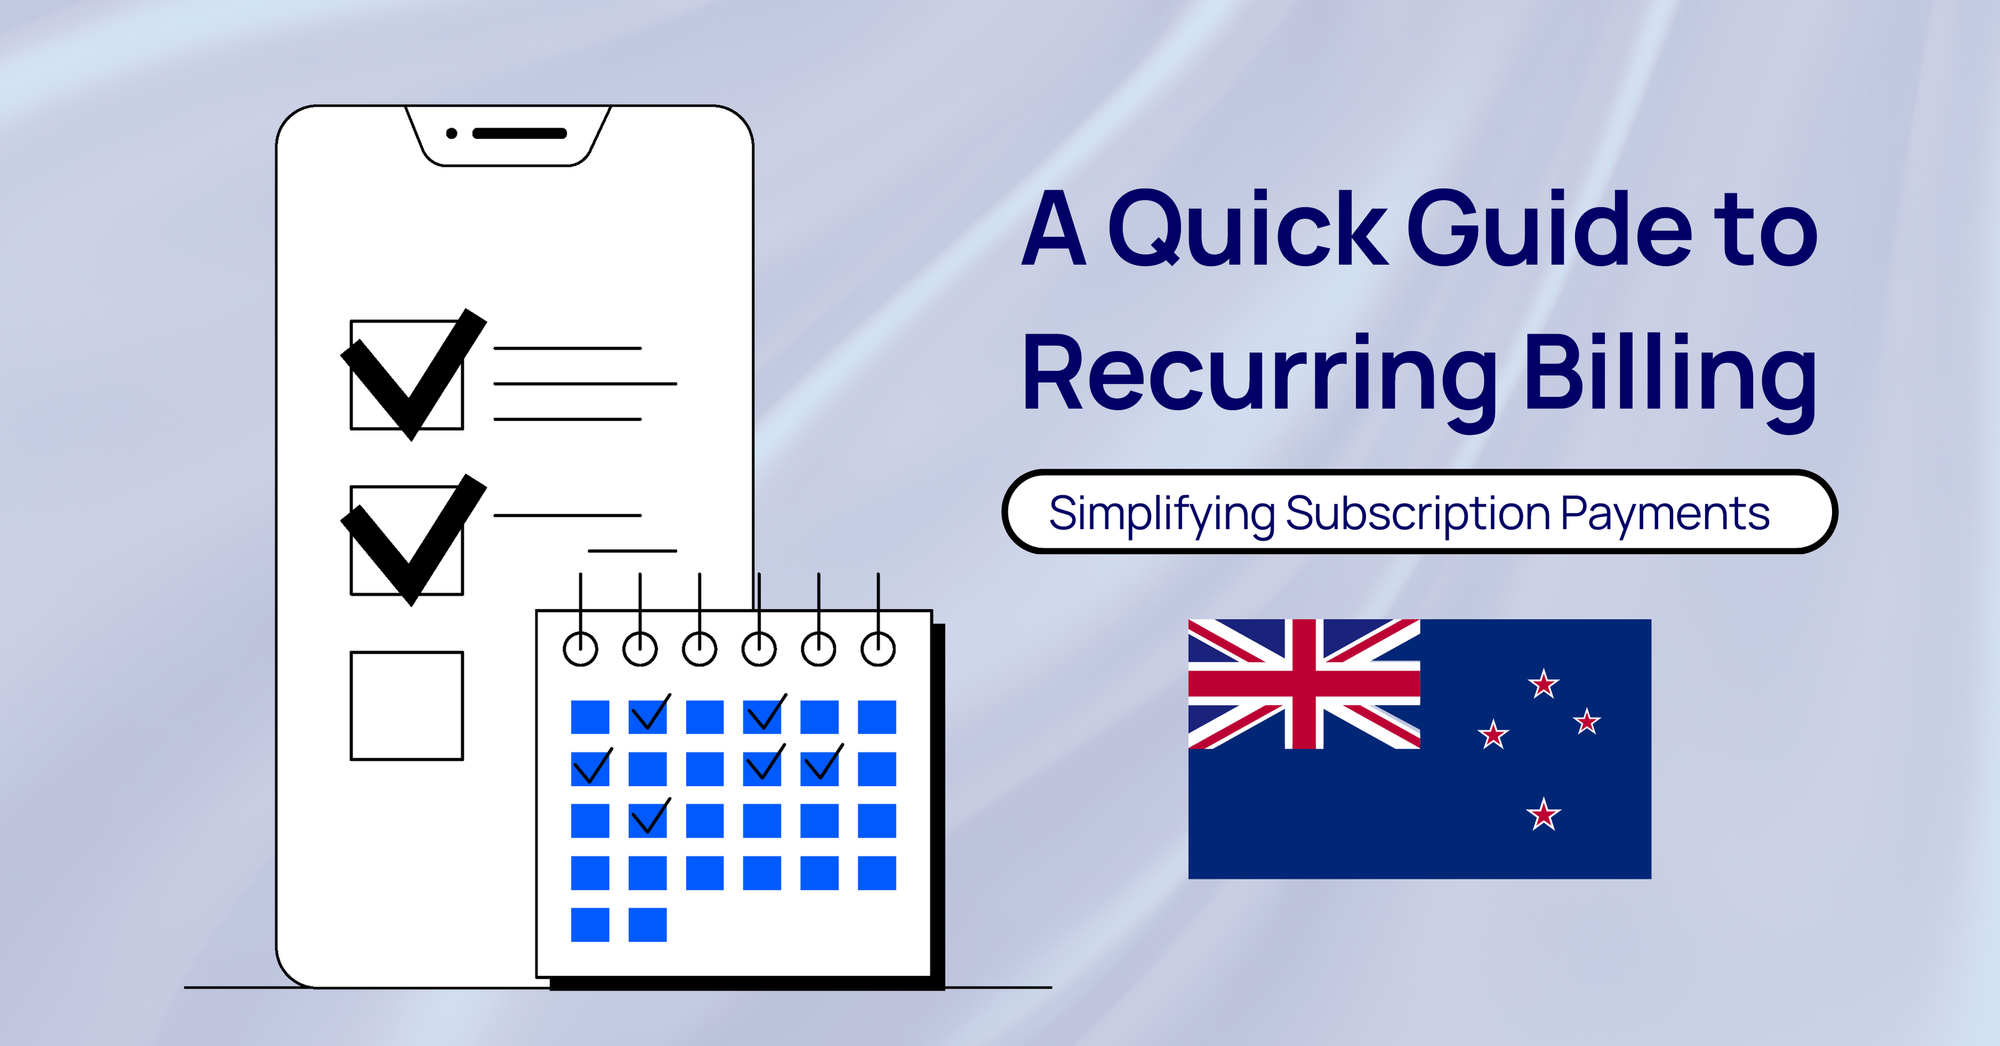 A Quick Guide to Recurring Billing in New Zealand: Simplifying Subscription Payments